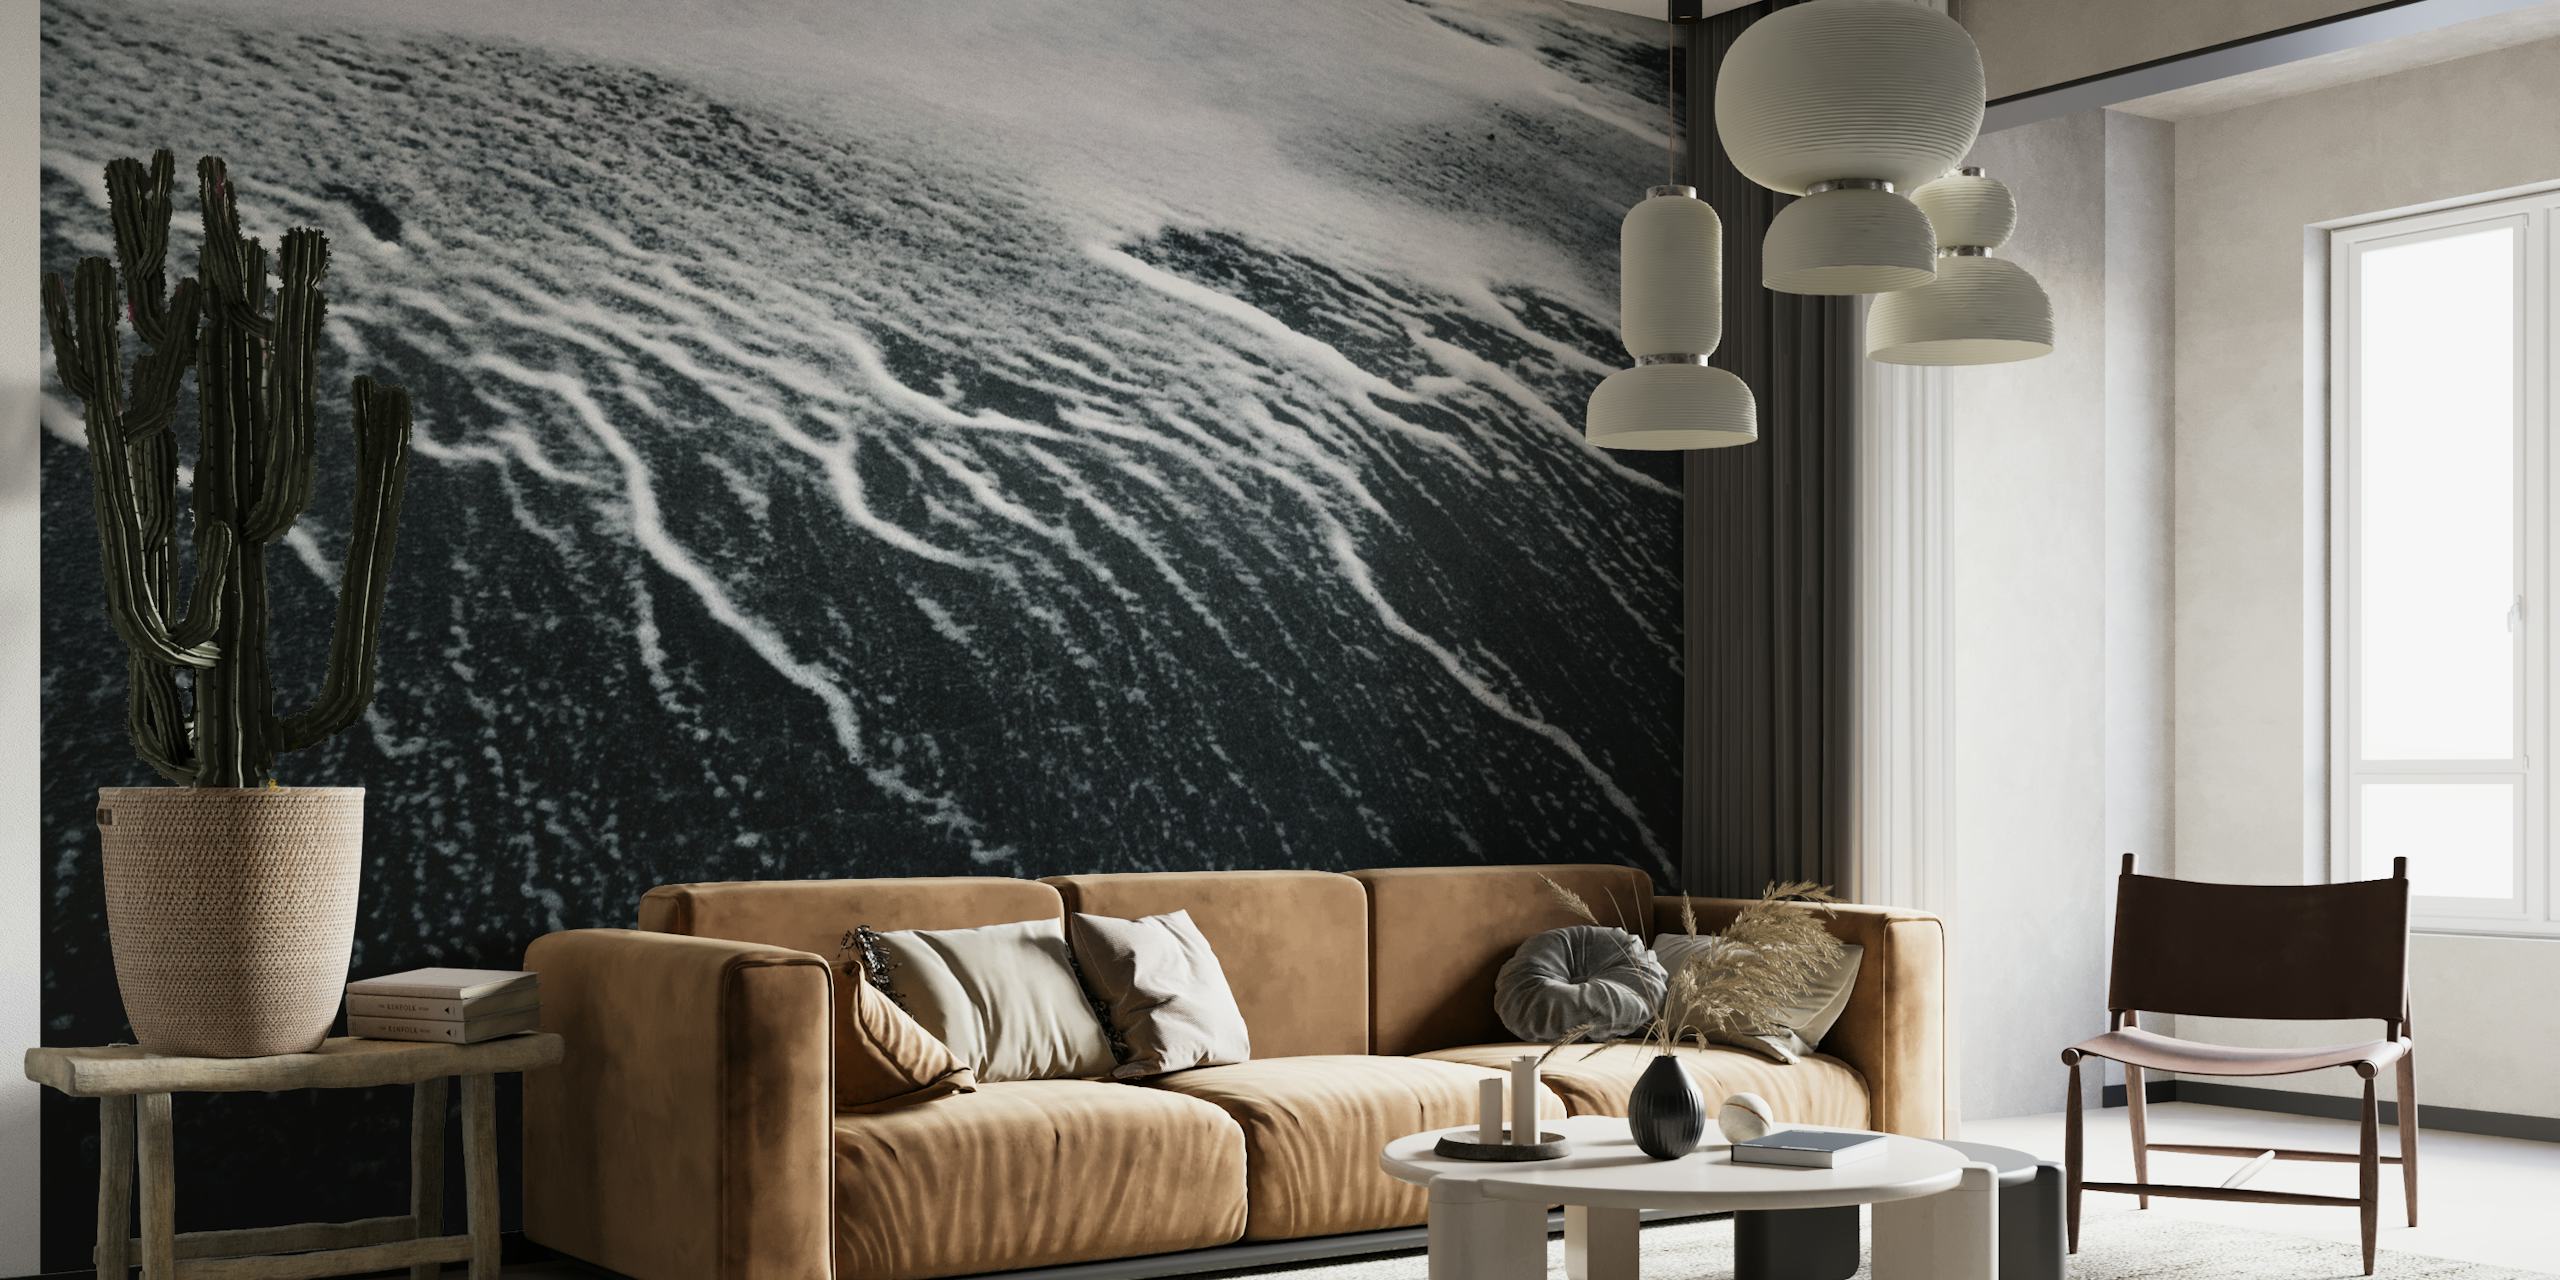 Black and white close-up wall mural of wave patterns on sand depicting the remains of a wave